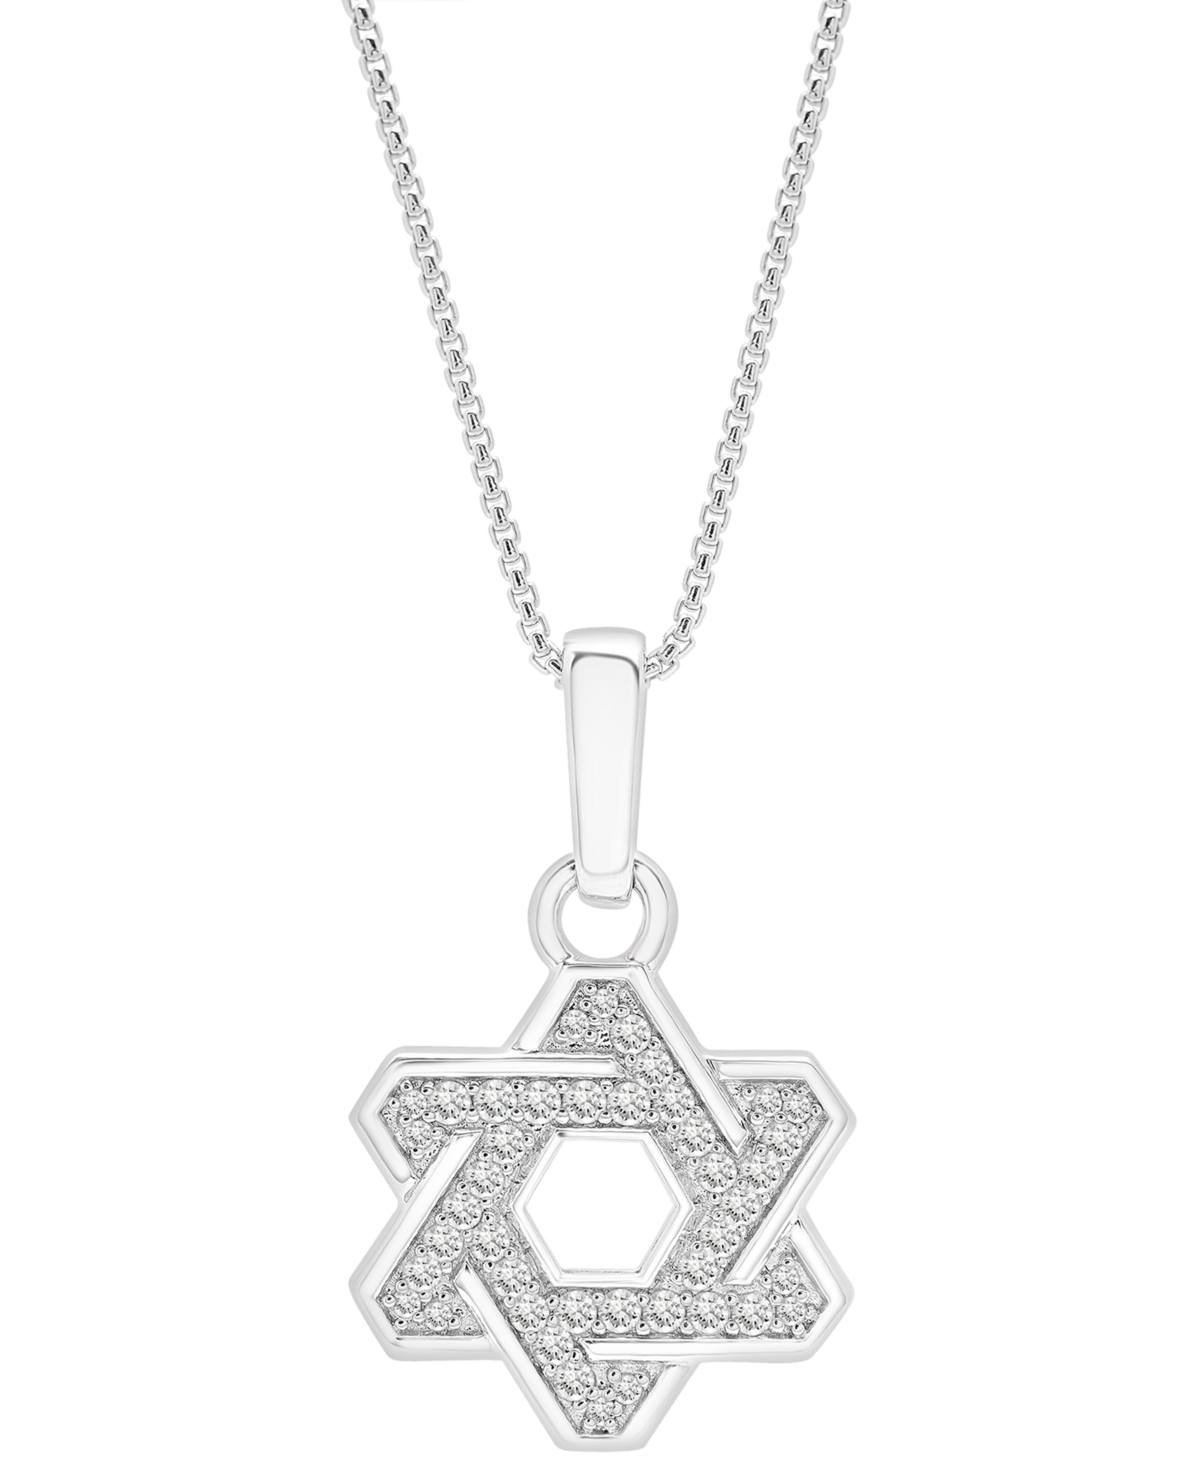 Men's Star of David Open 22" Pendant Necklace (1/2 ct. t.w.) in Sterling Silver - Silver